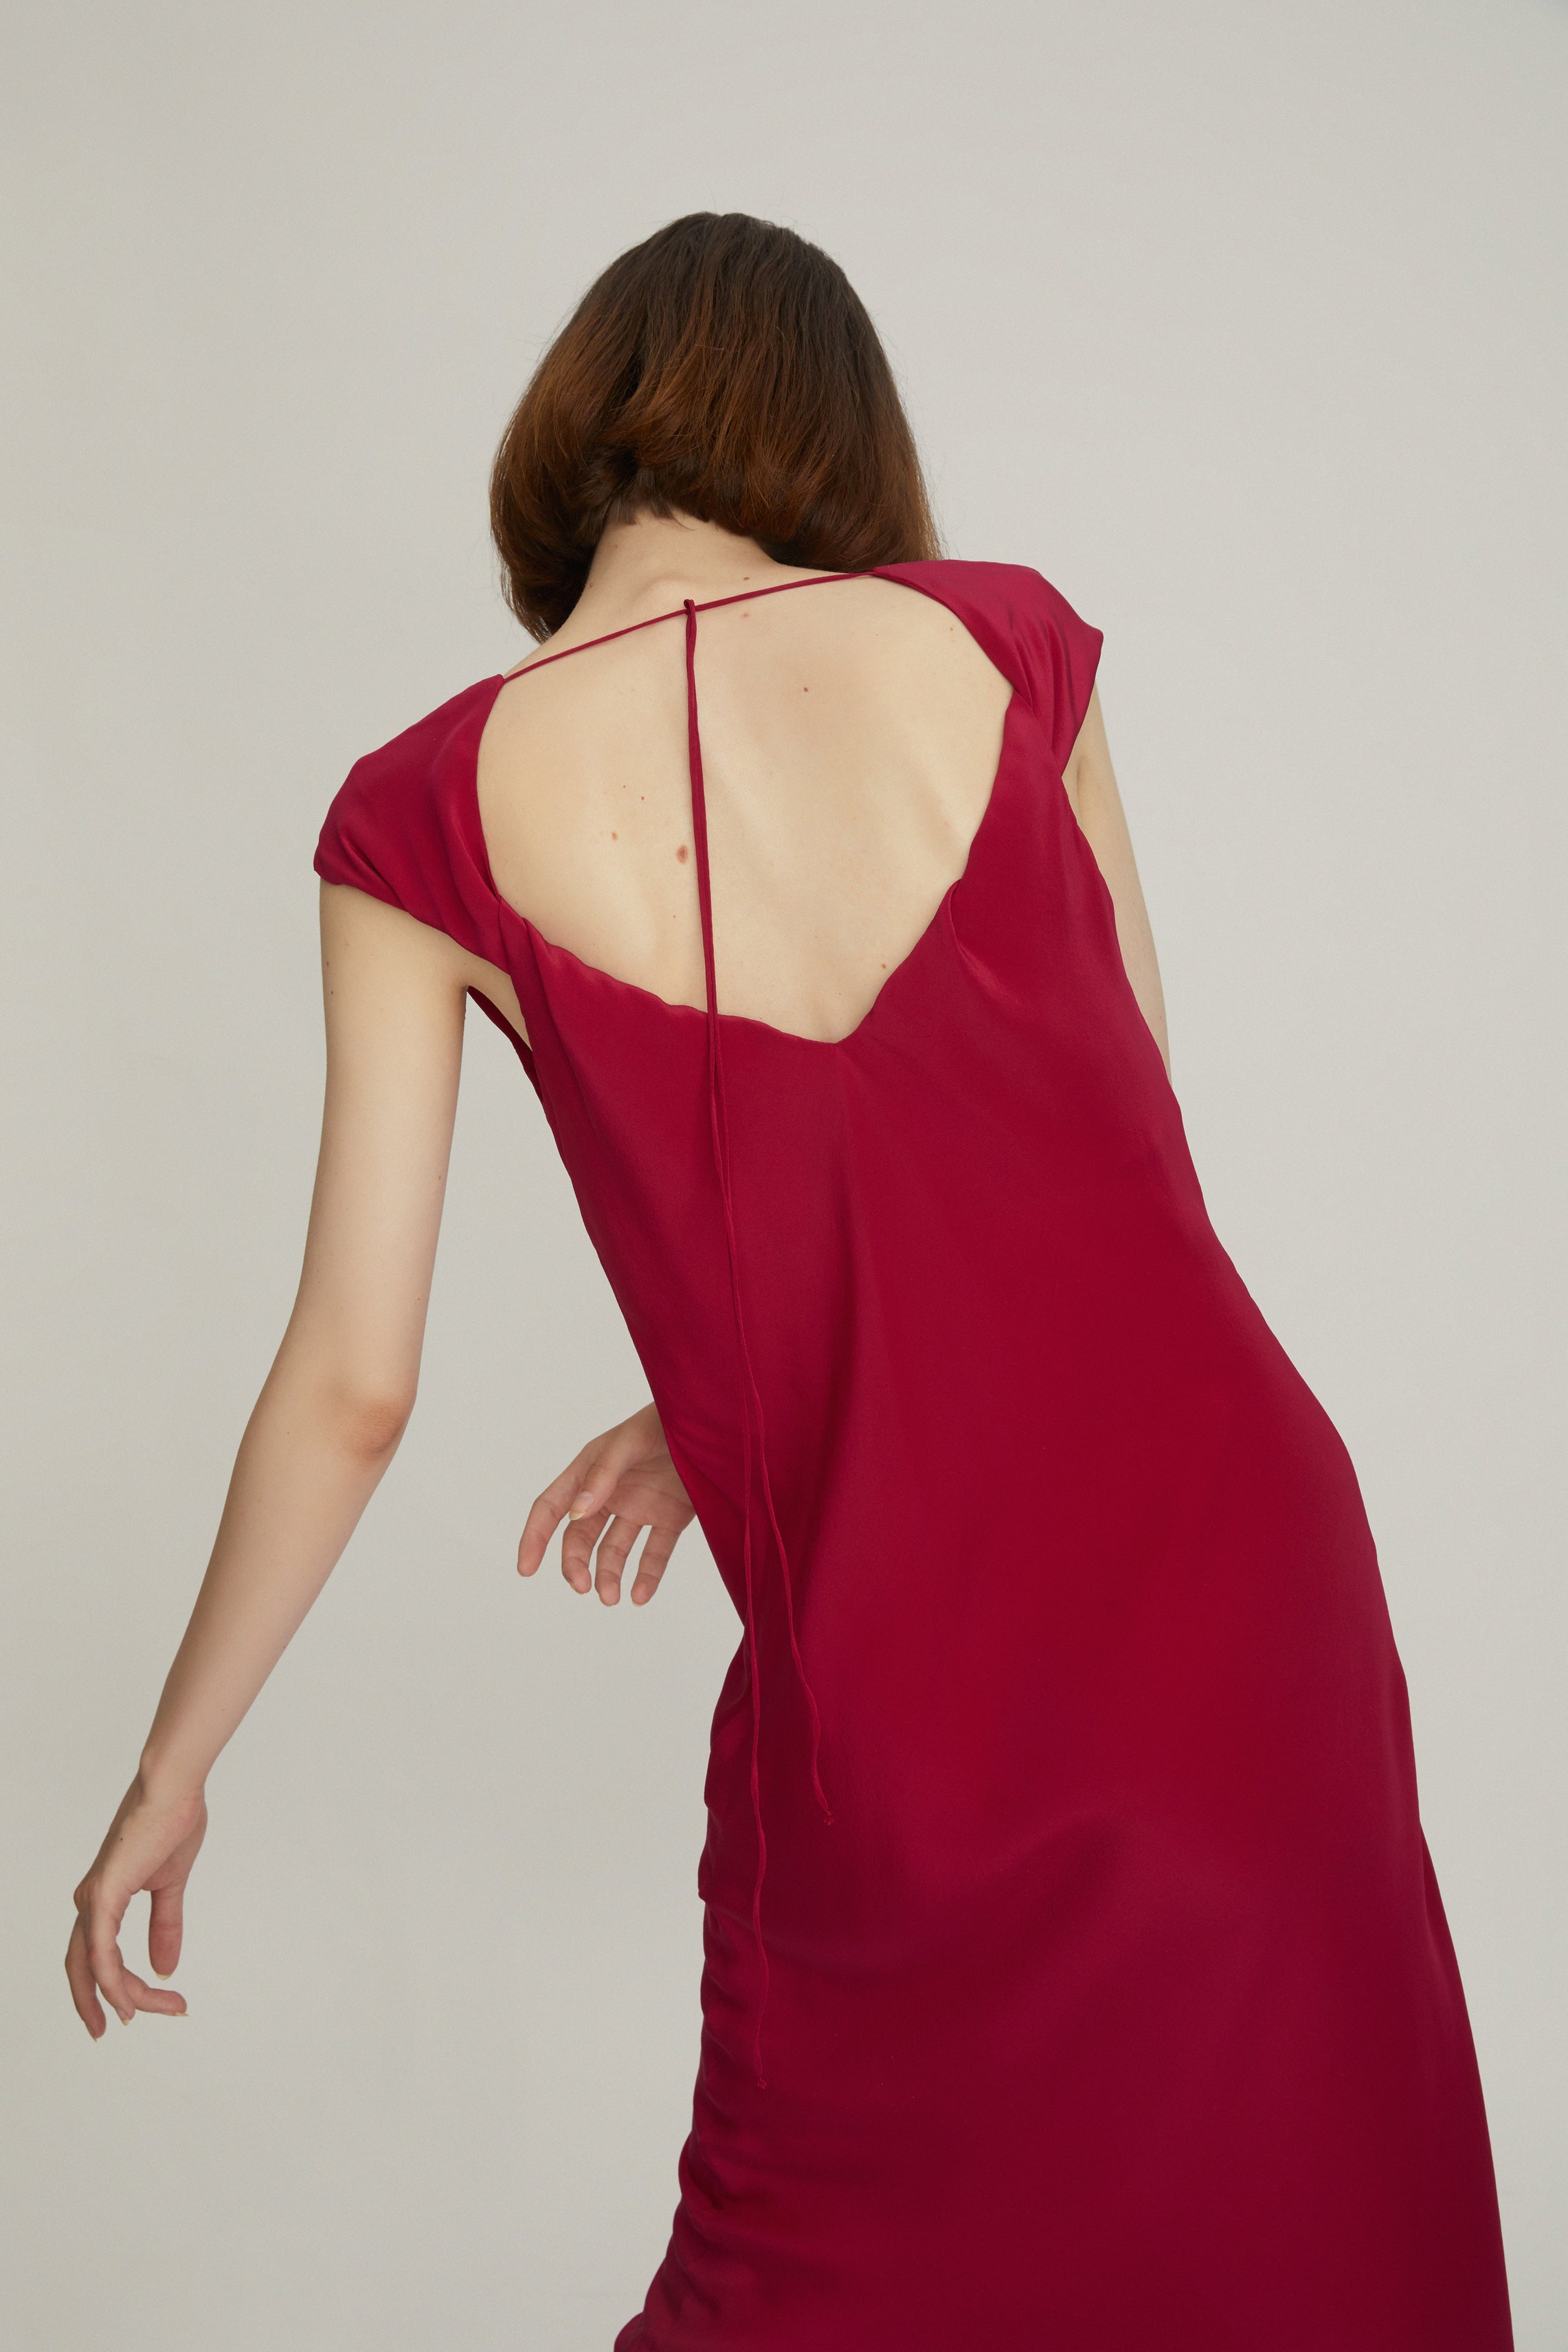 The Popping Pink Silk dress is a lightweight, slip-on style that slightly flares towards the hem for a clean silhouette.   Made from fluid 100% silk with a smooth quality, this slip dress is designed with an elegant deep V-neck.The twisted back detail was added as a statement to a polished look. 